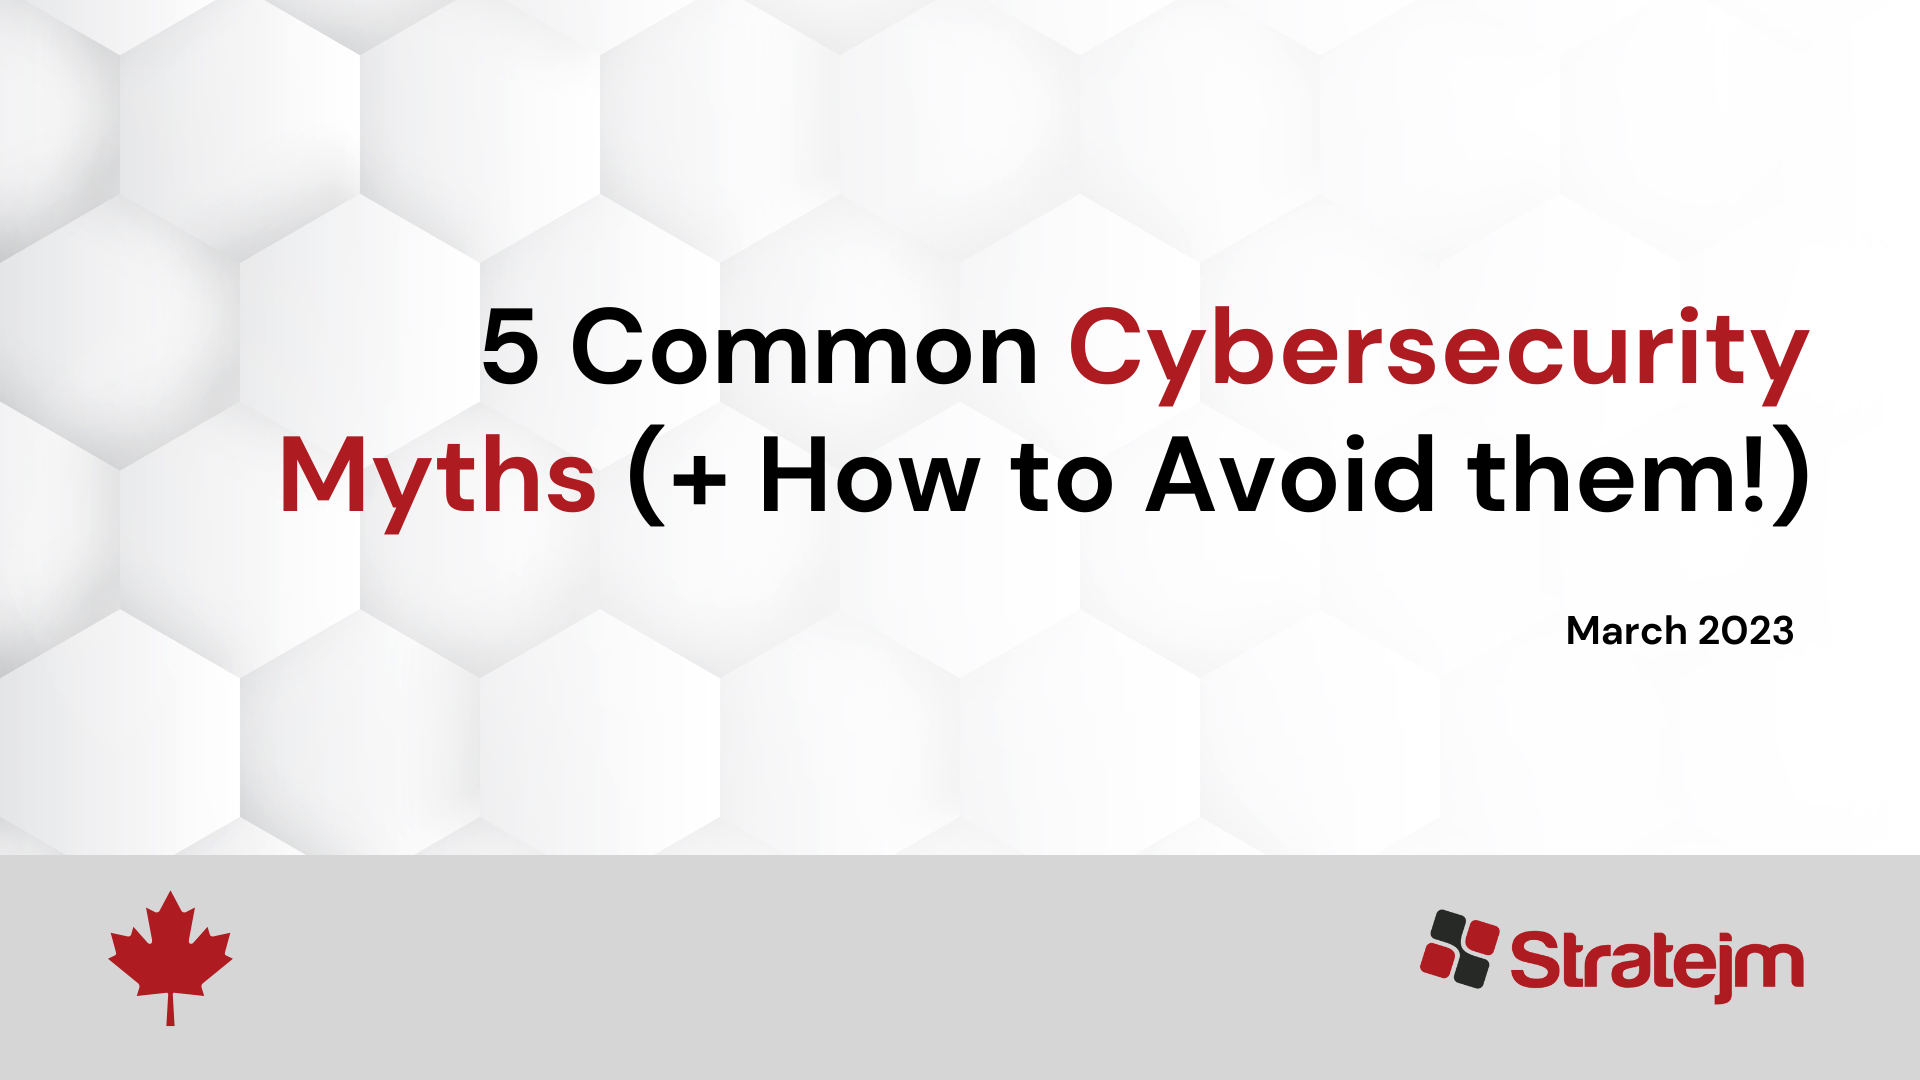 The Most Common Cybersecurity Myths and How to Avoid Them